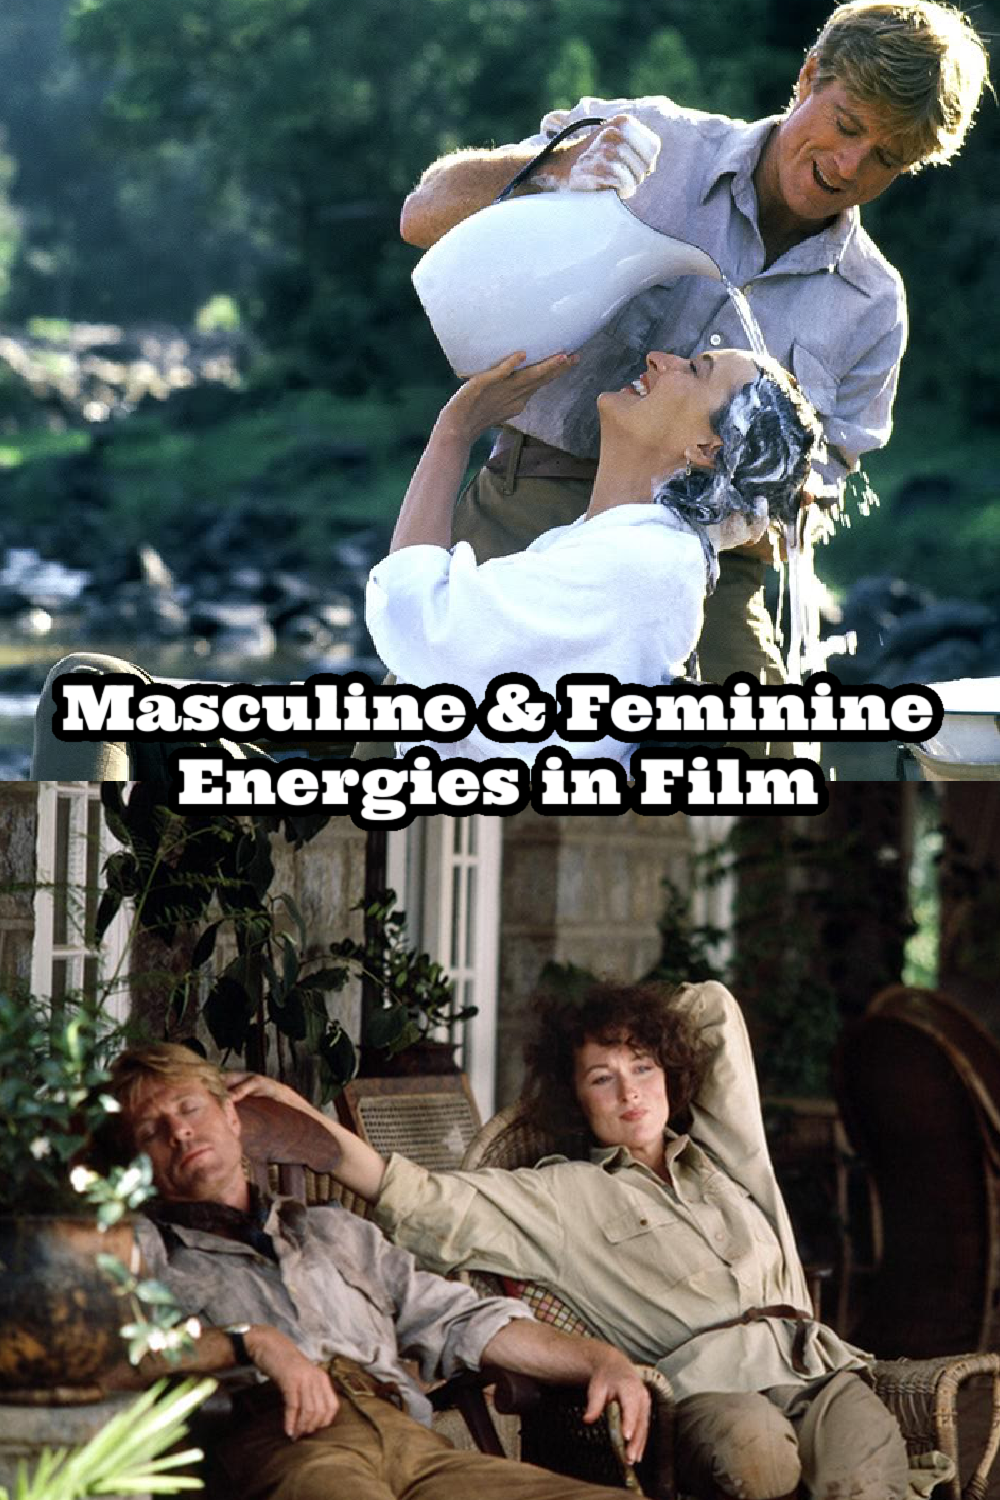 out of africa movie review, sexual polarity masculine feminine, feminine energy in relationships, sexual polarity in relationships, sexual polarity, sexual polarity masculine feminine, law of polarity in relationships, how to create polarity in relationships, wounded feminine energy, understanding masculine and feminine energy, feminine and masculine energy in relationships, difference between feminine and masculine energy, feminine and masculine energy traits, Everyday starlet, sarah blodgett,